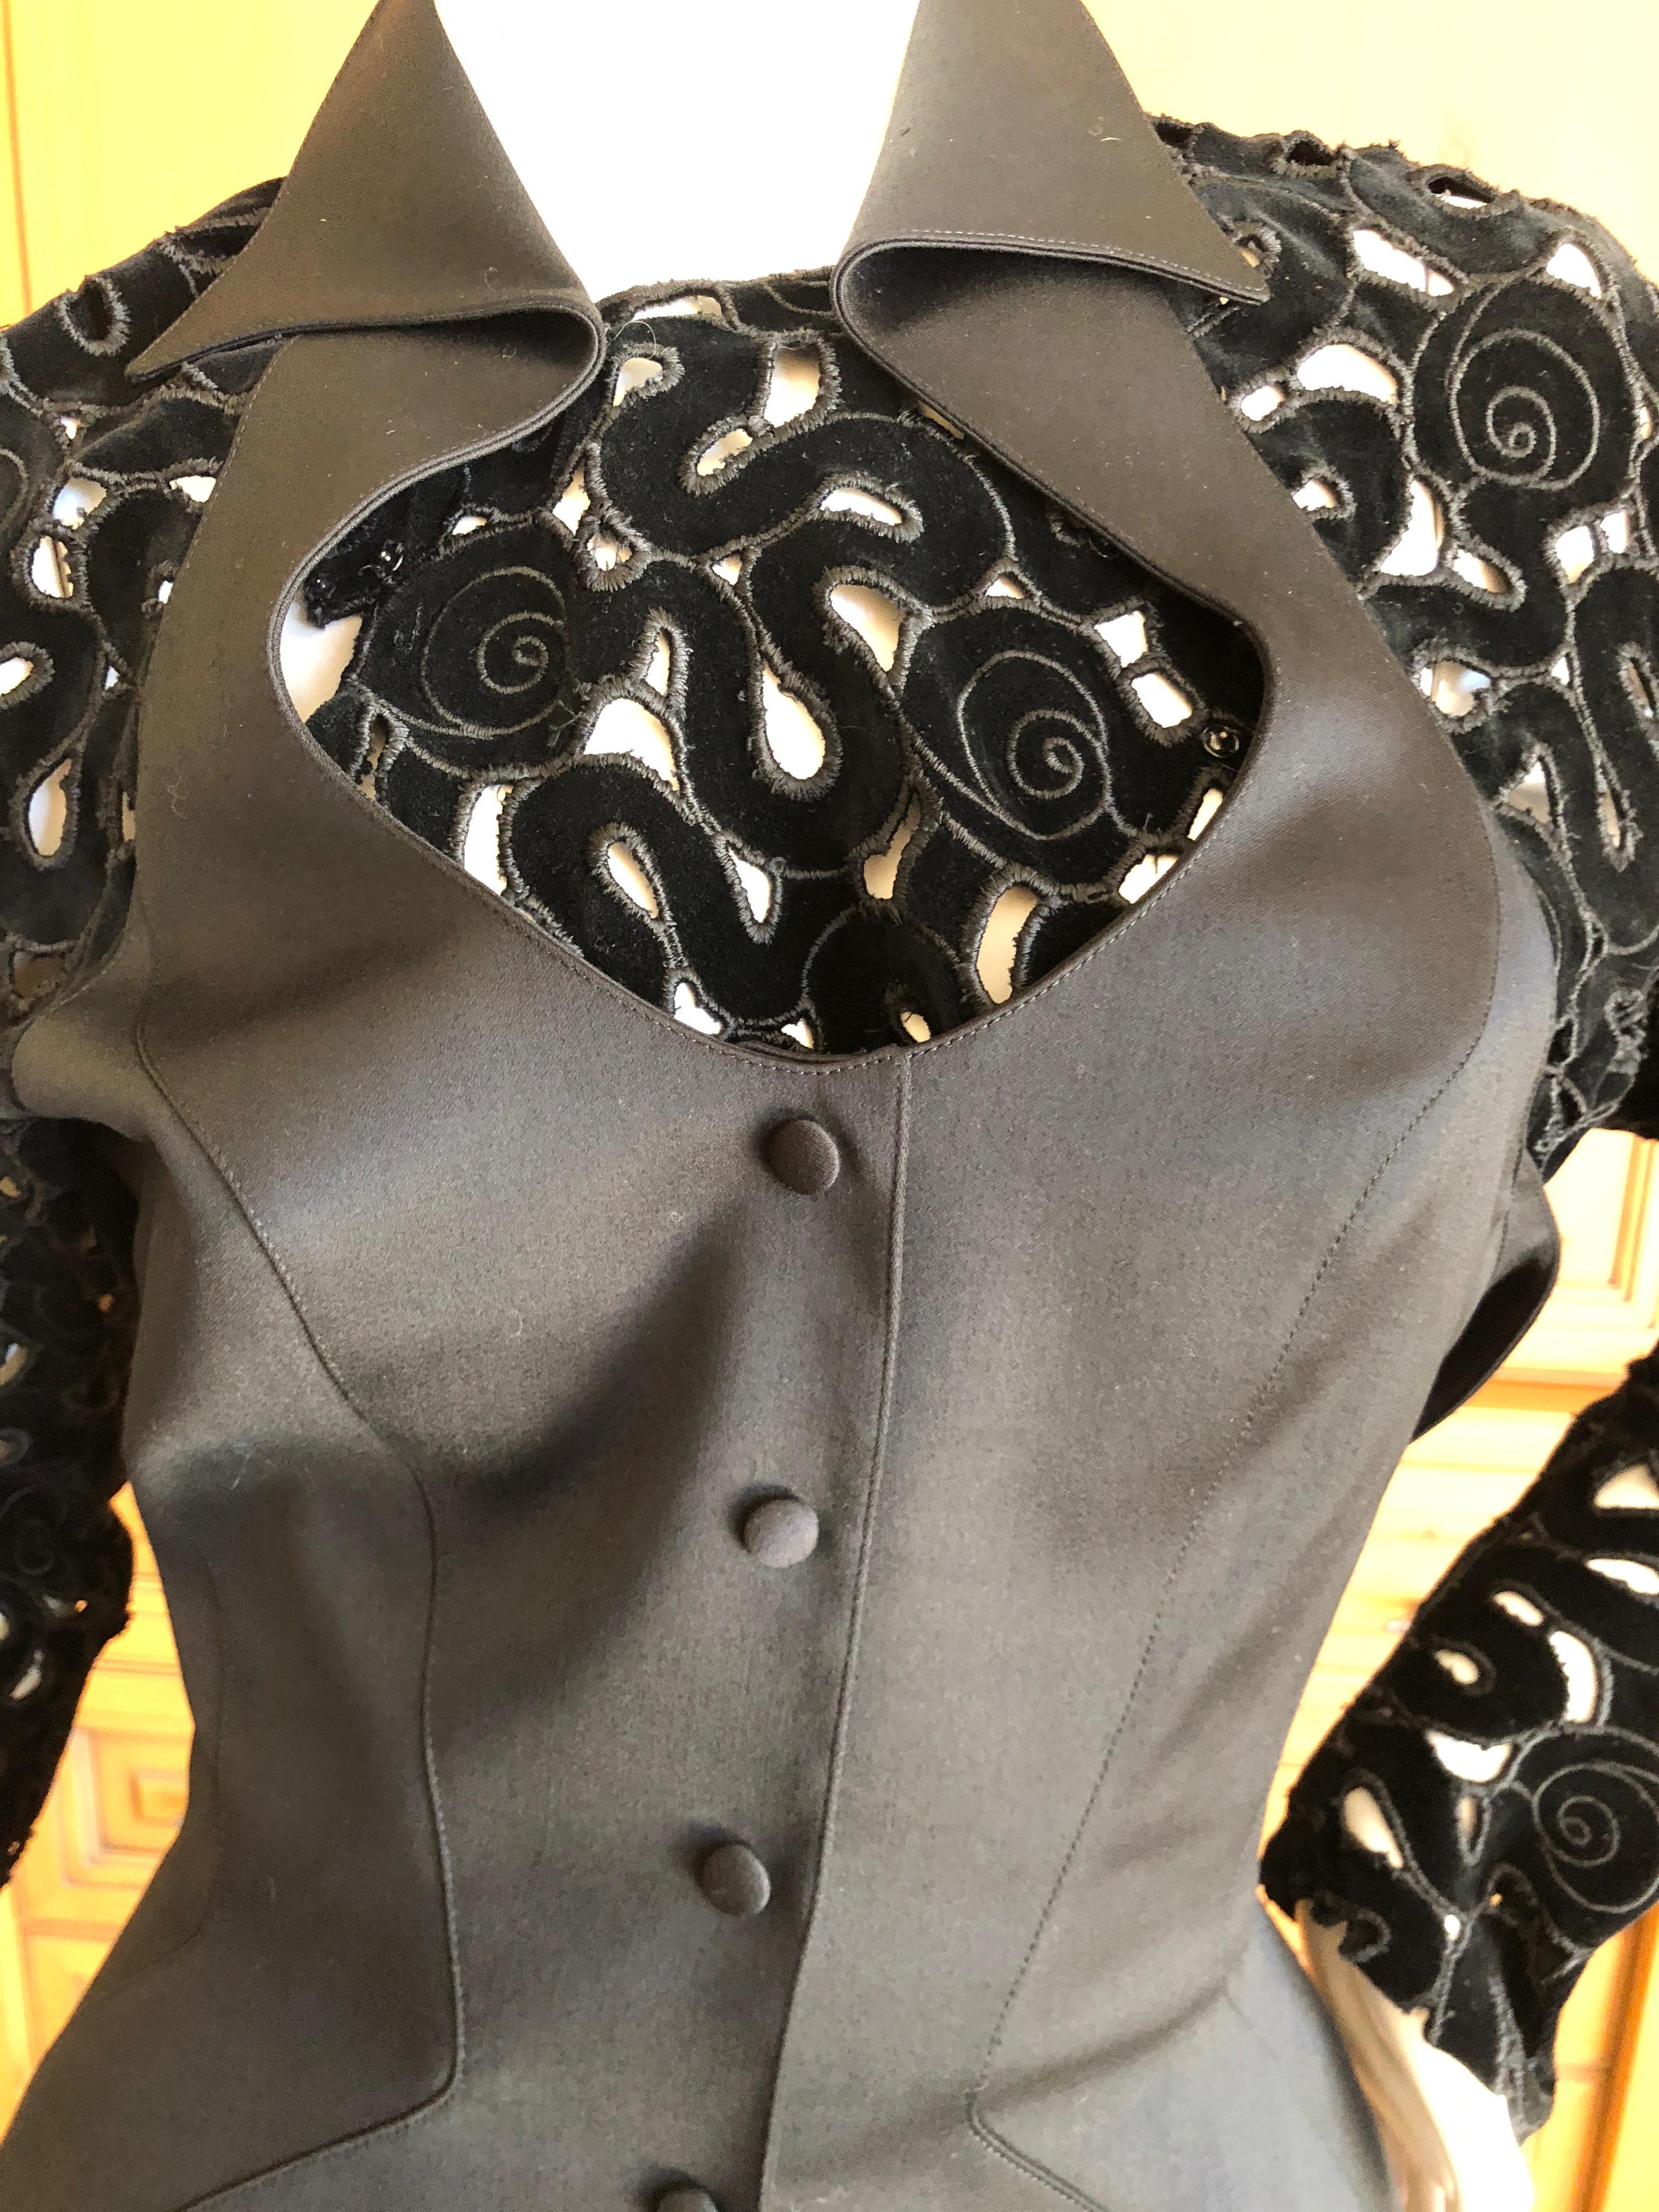 Thierry Mugler Vintage 1980's Black Evening Suit with Cut Out Velvet Details 36 In Excellent Condition For Sale In Cloverdale, CA